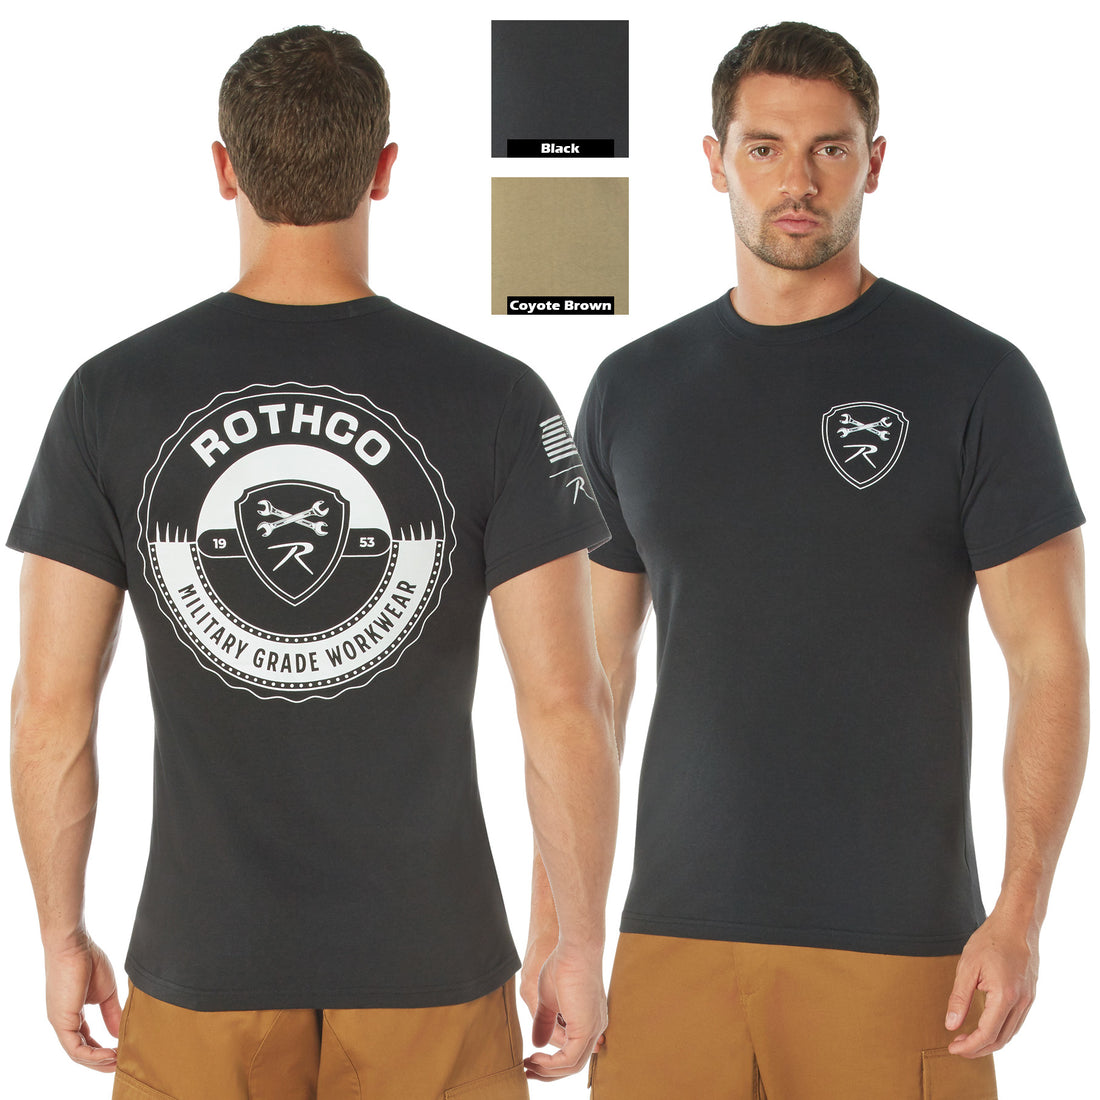 Rothco's Military Grade WWI Bottle Cap T-Shirt